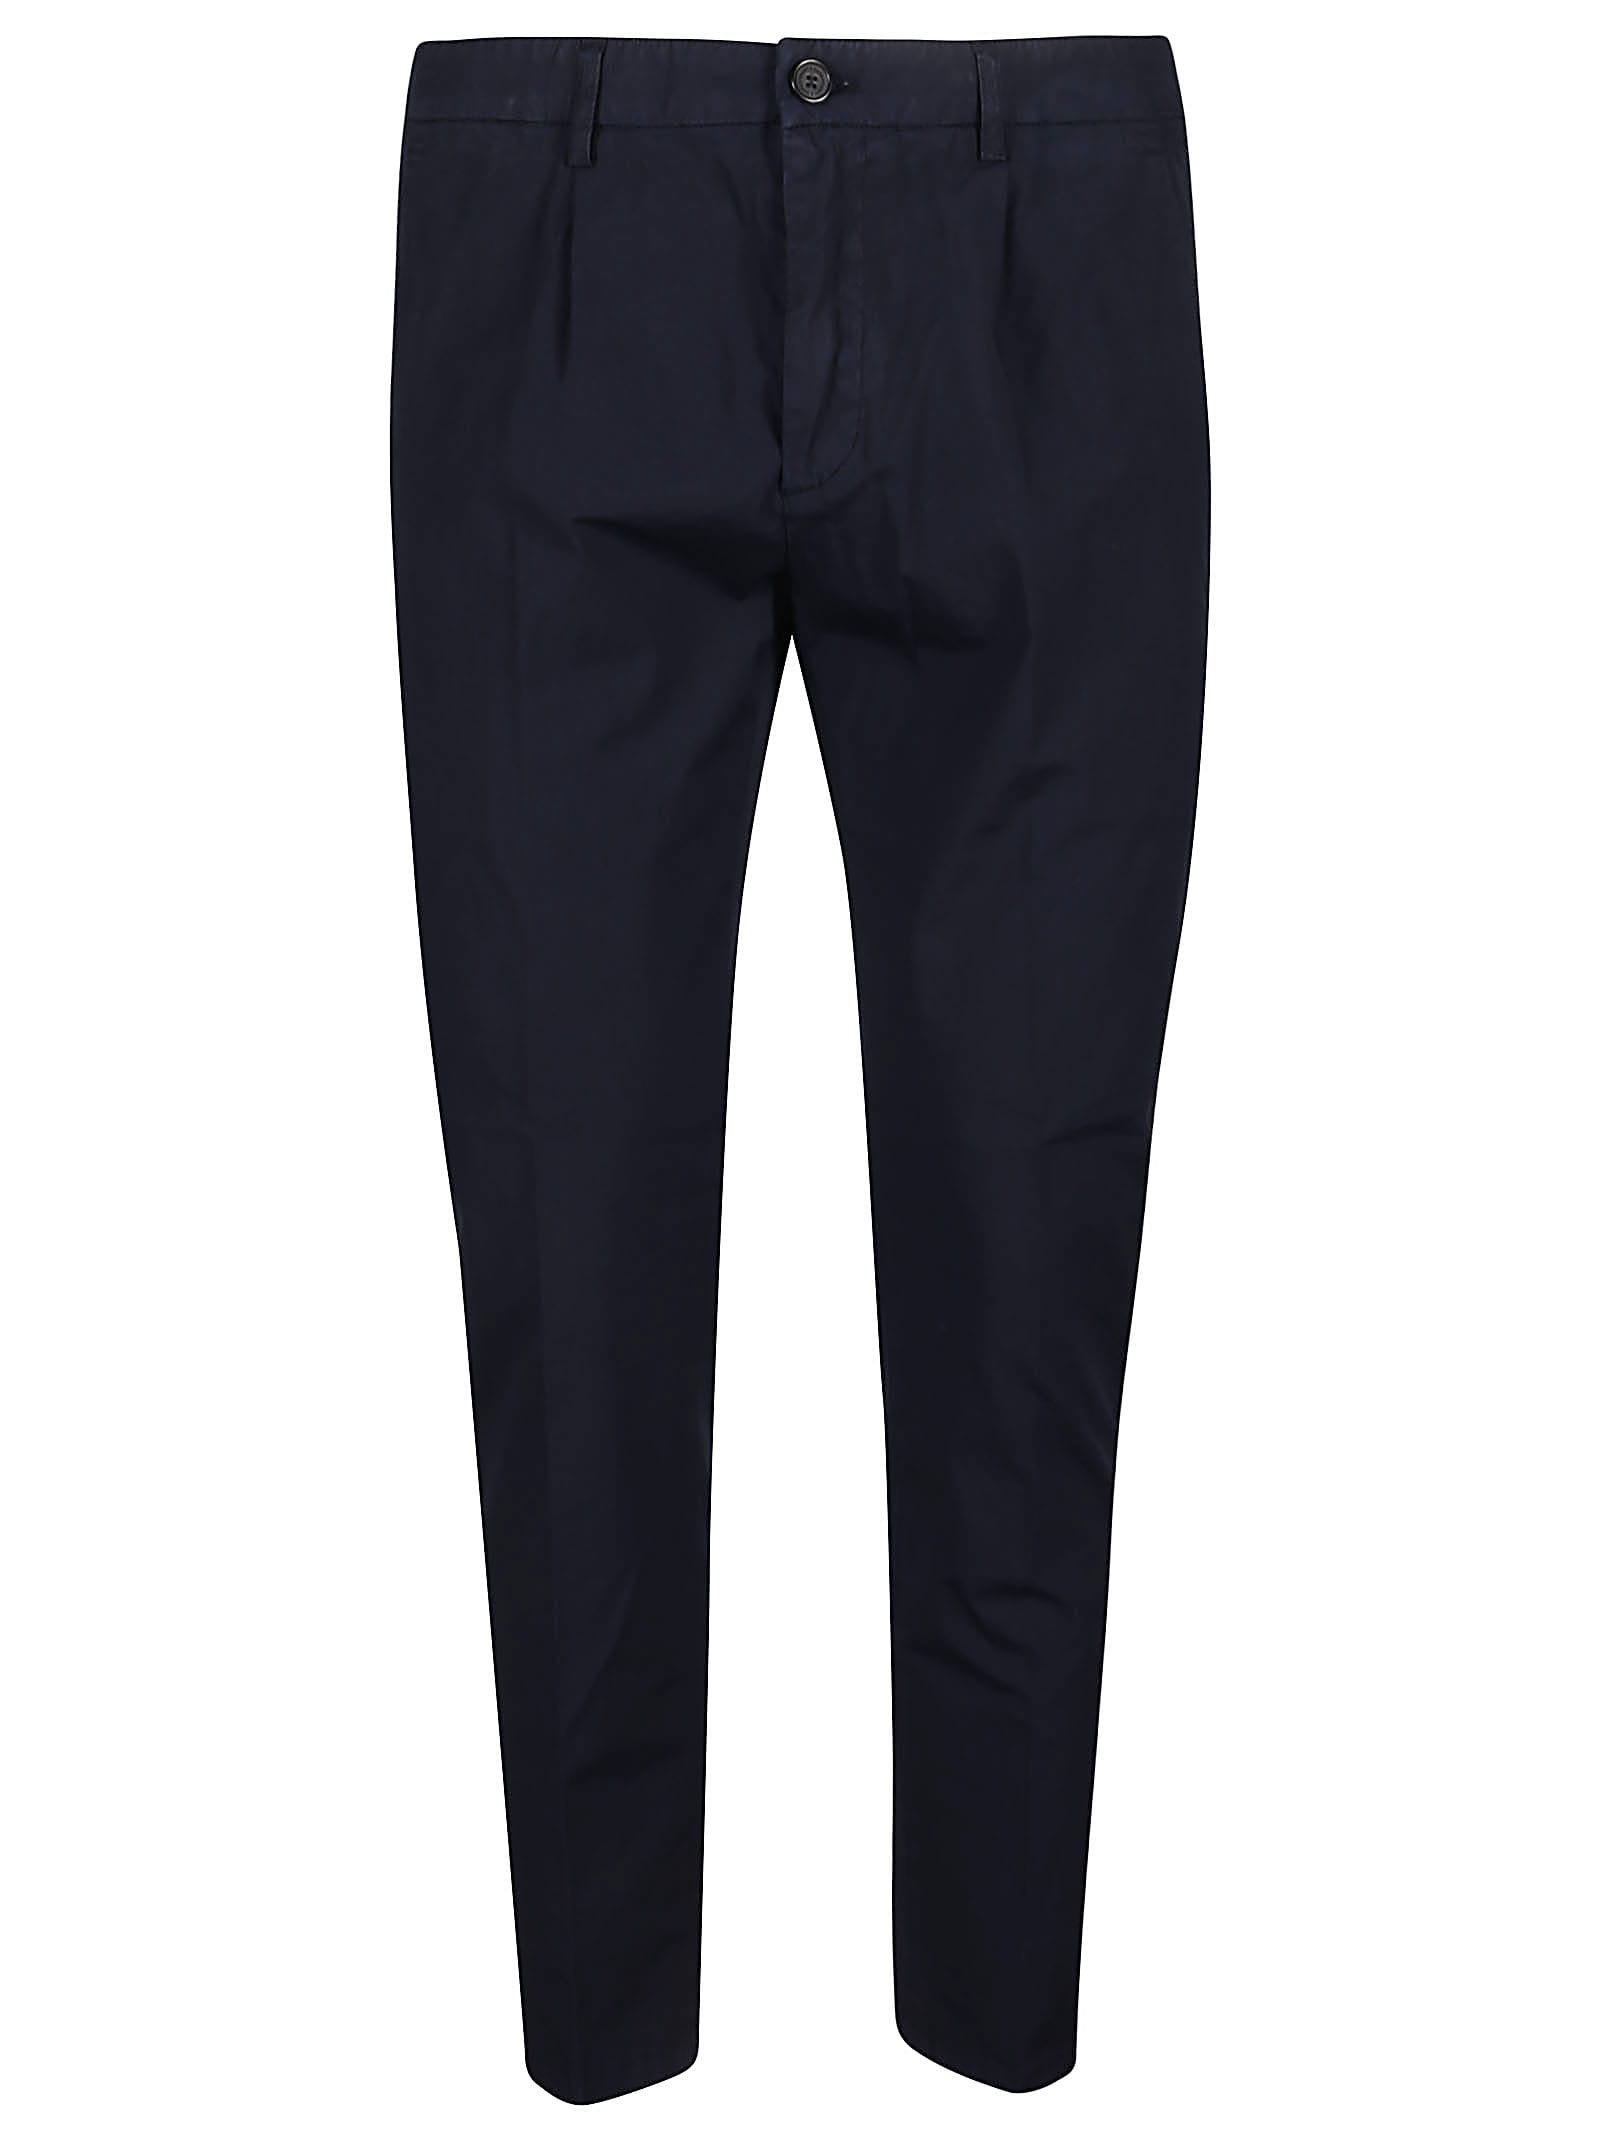 Shop Department Five Prince Pences Chinos Pant In Navy